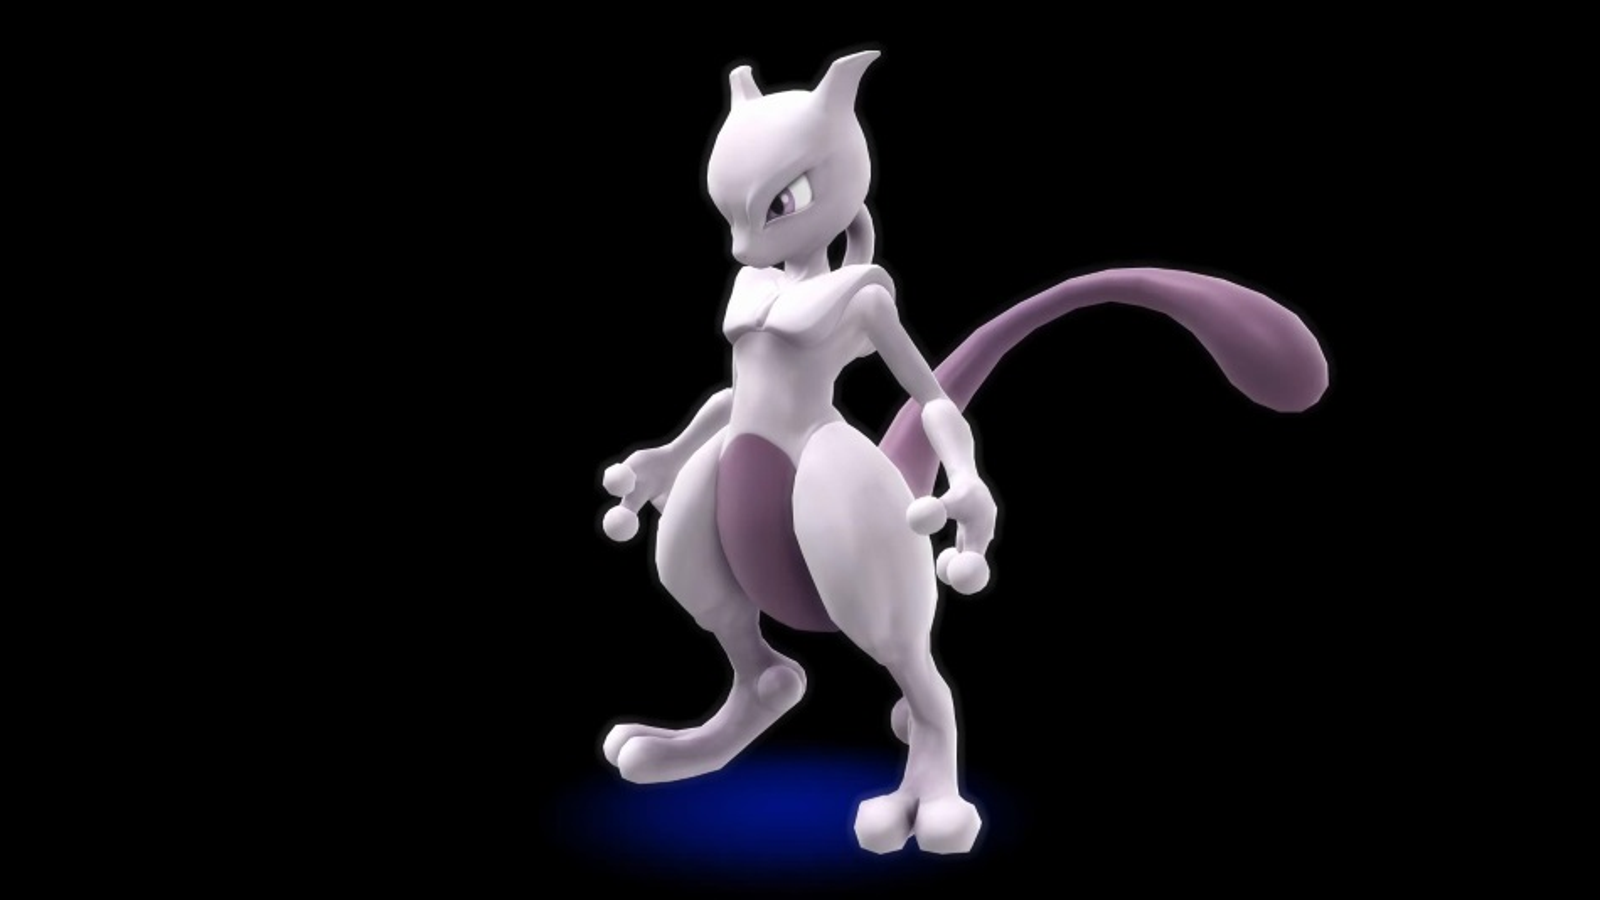 POKEMON GO - Catching Mew and Mewtwo! (Pokemon GO Catching Guide) 